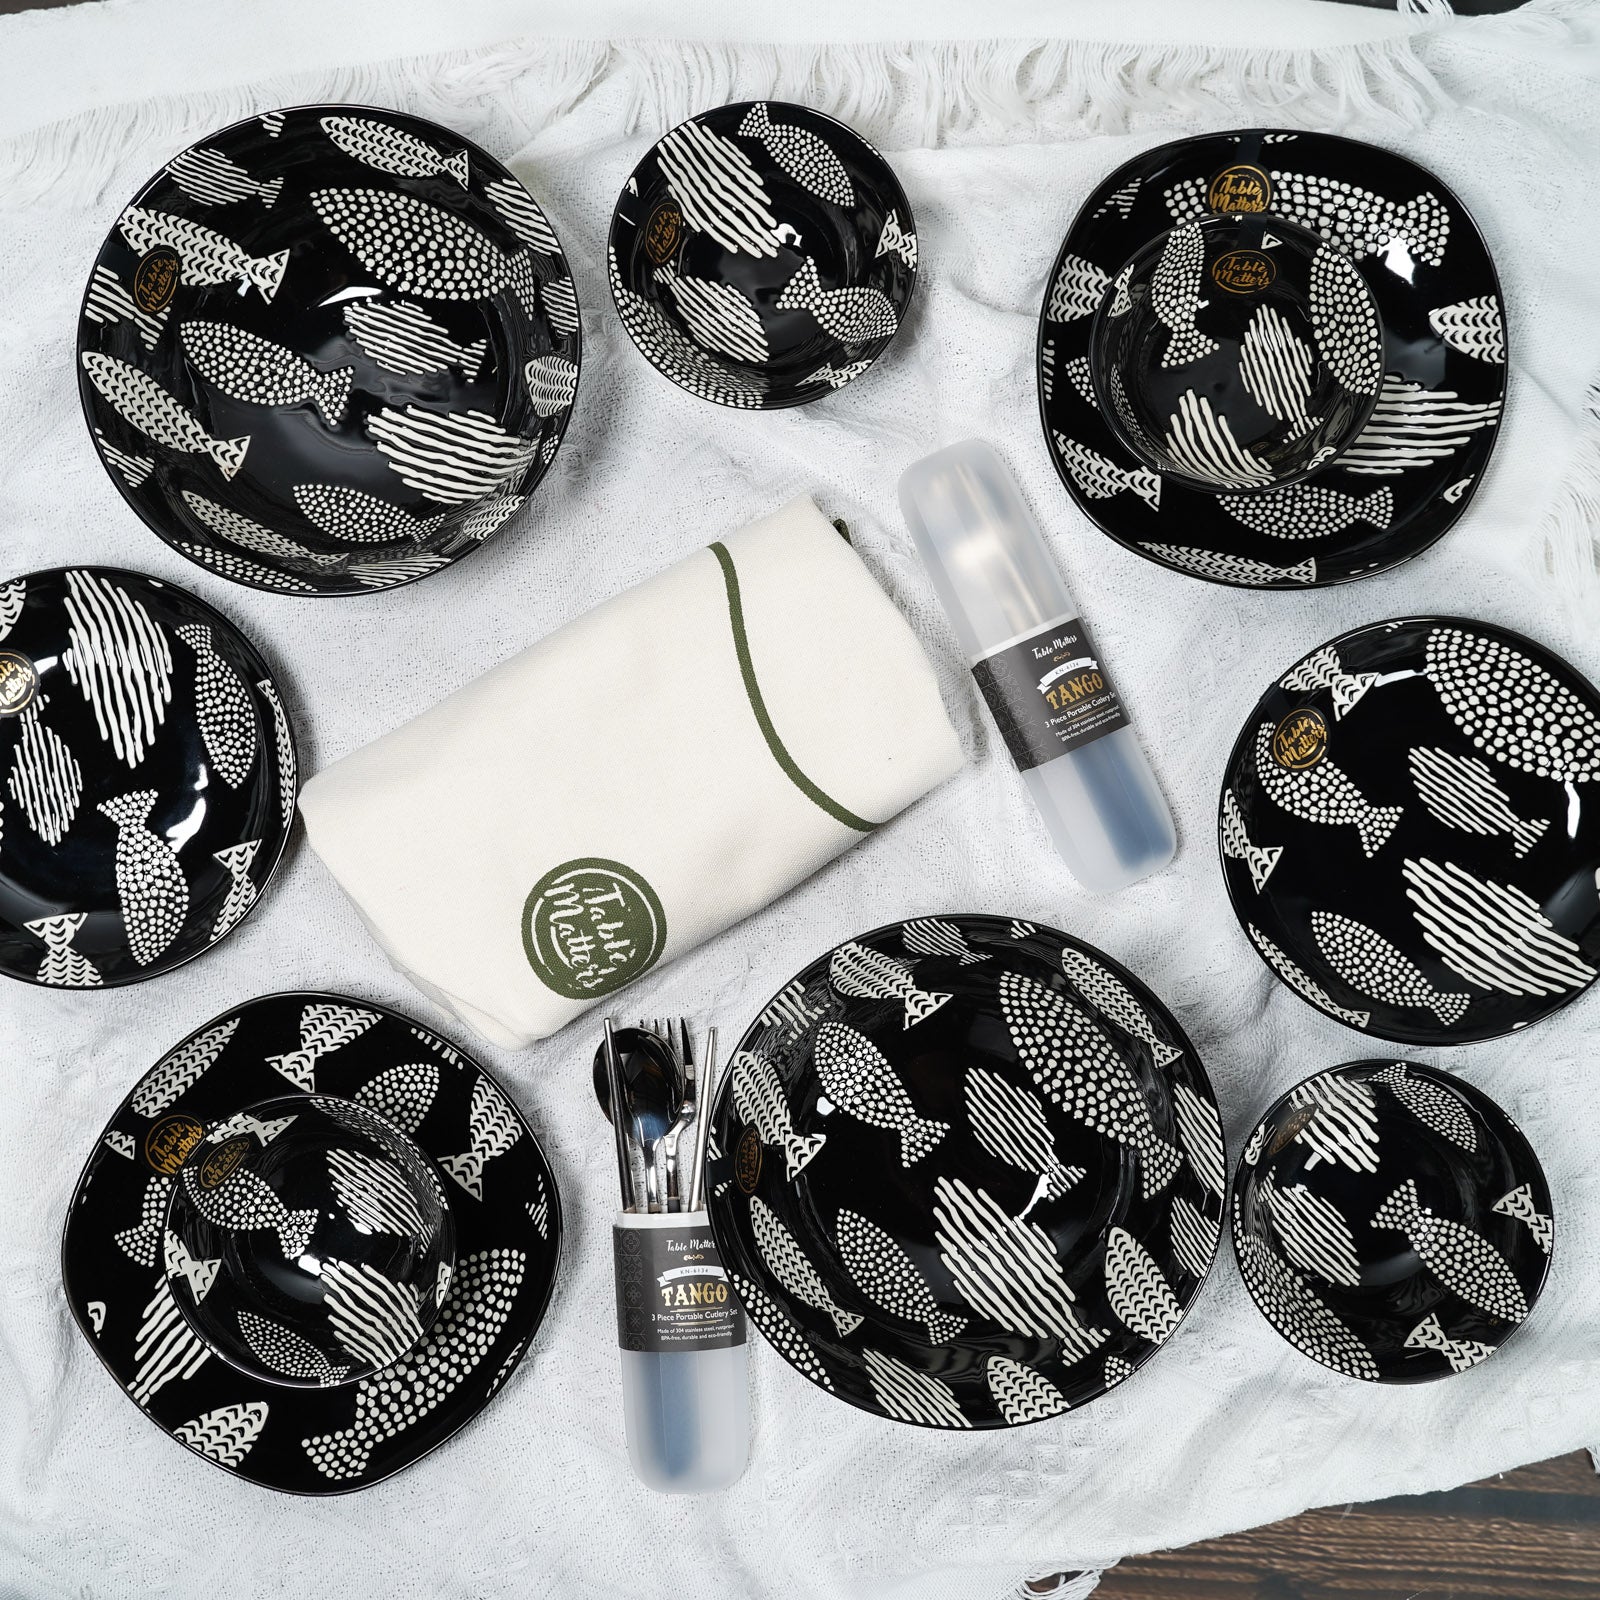 Bundle Deal For 2 - Fishes Ebony Hand Painted 16PCS Dining Set